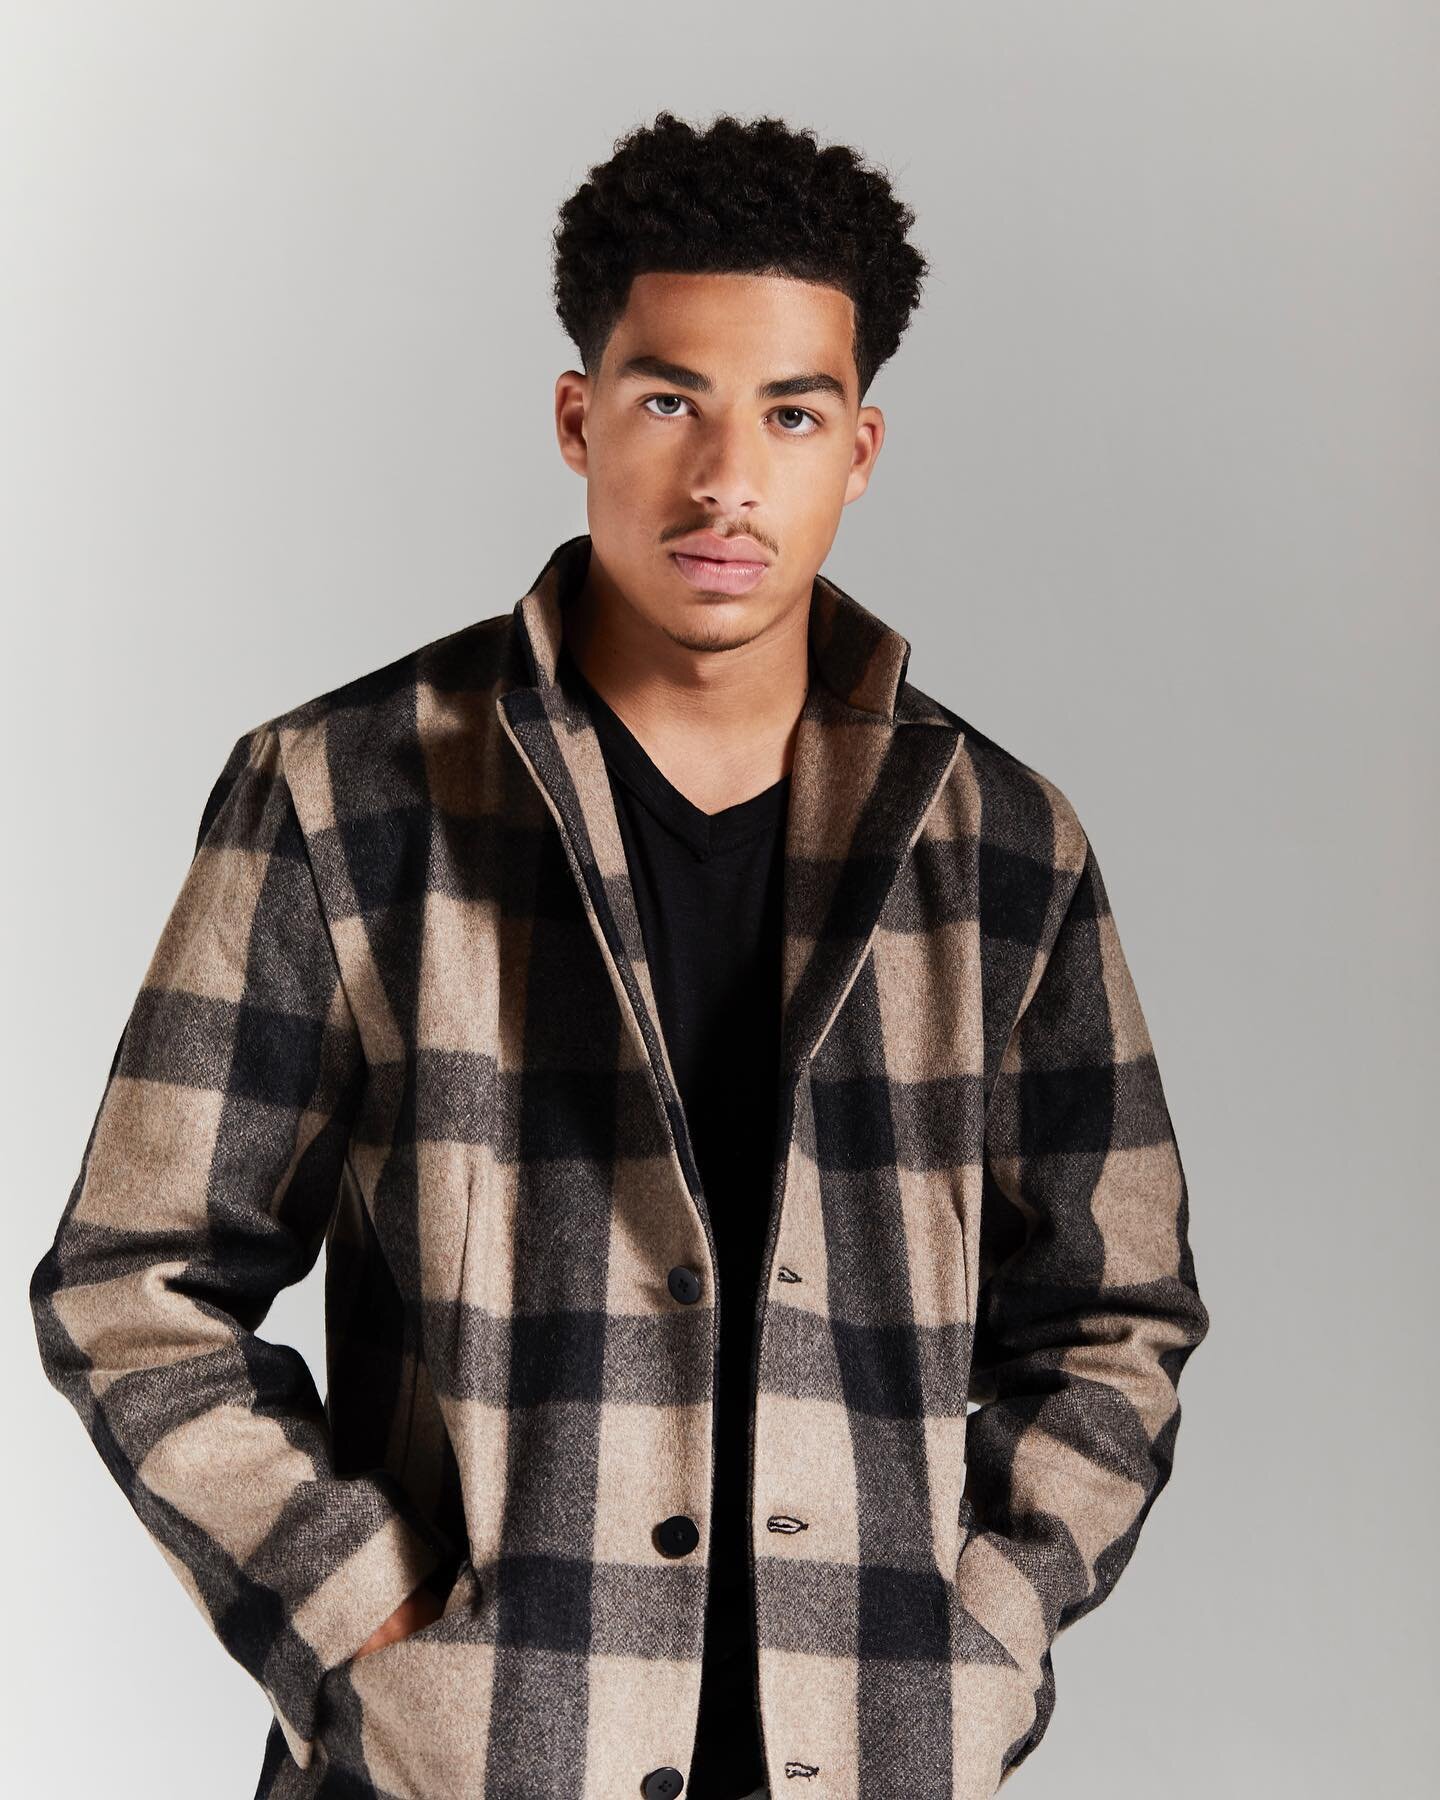 At only 13 years old, Marcus Scribner (@marcusscribner) booked a role on what would become the hit ABC series &lsquo;Black-ish,&rsquo; kick-starting his career in the entertainment industry. We chatted with the now 21-year-old Marcus about the succes